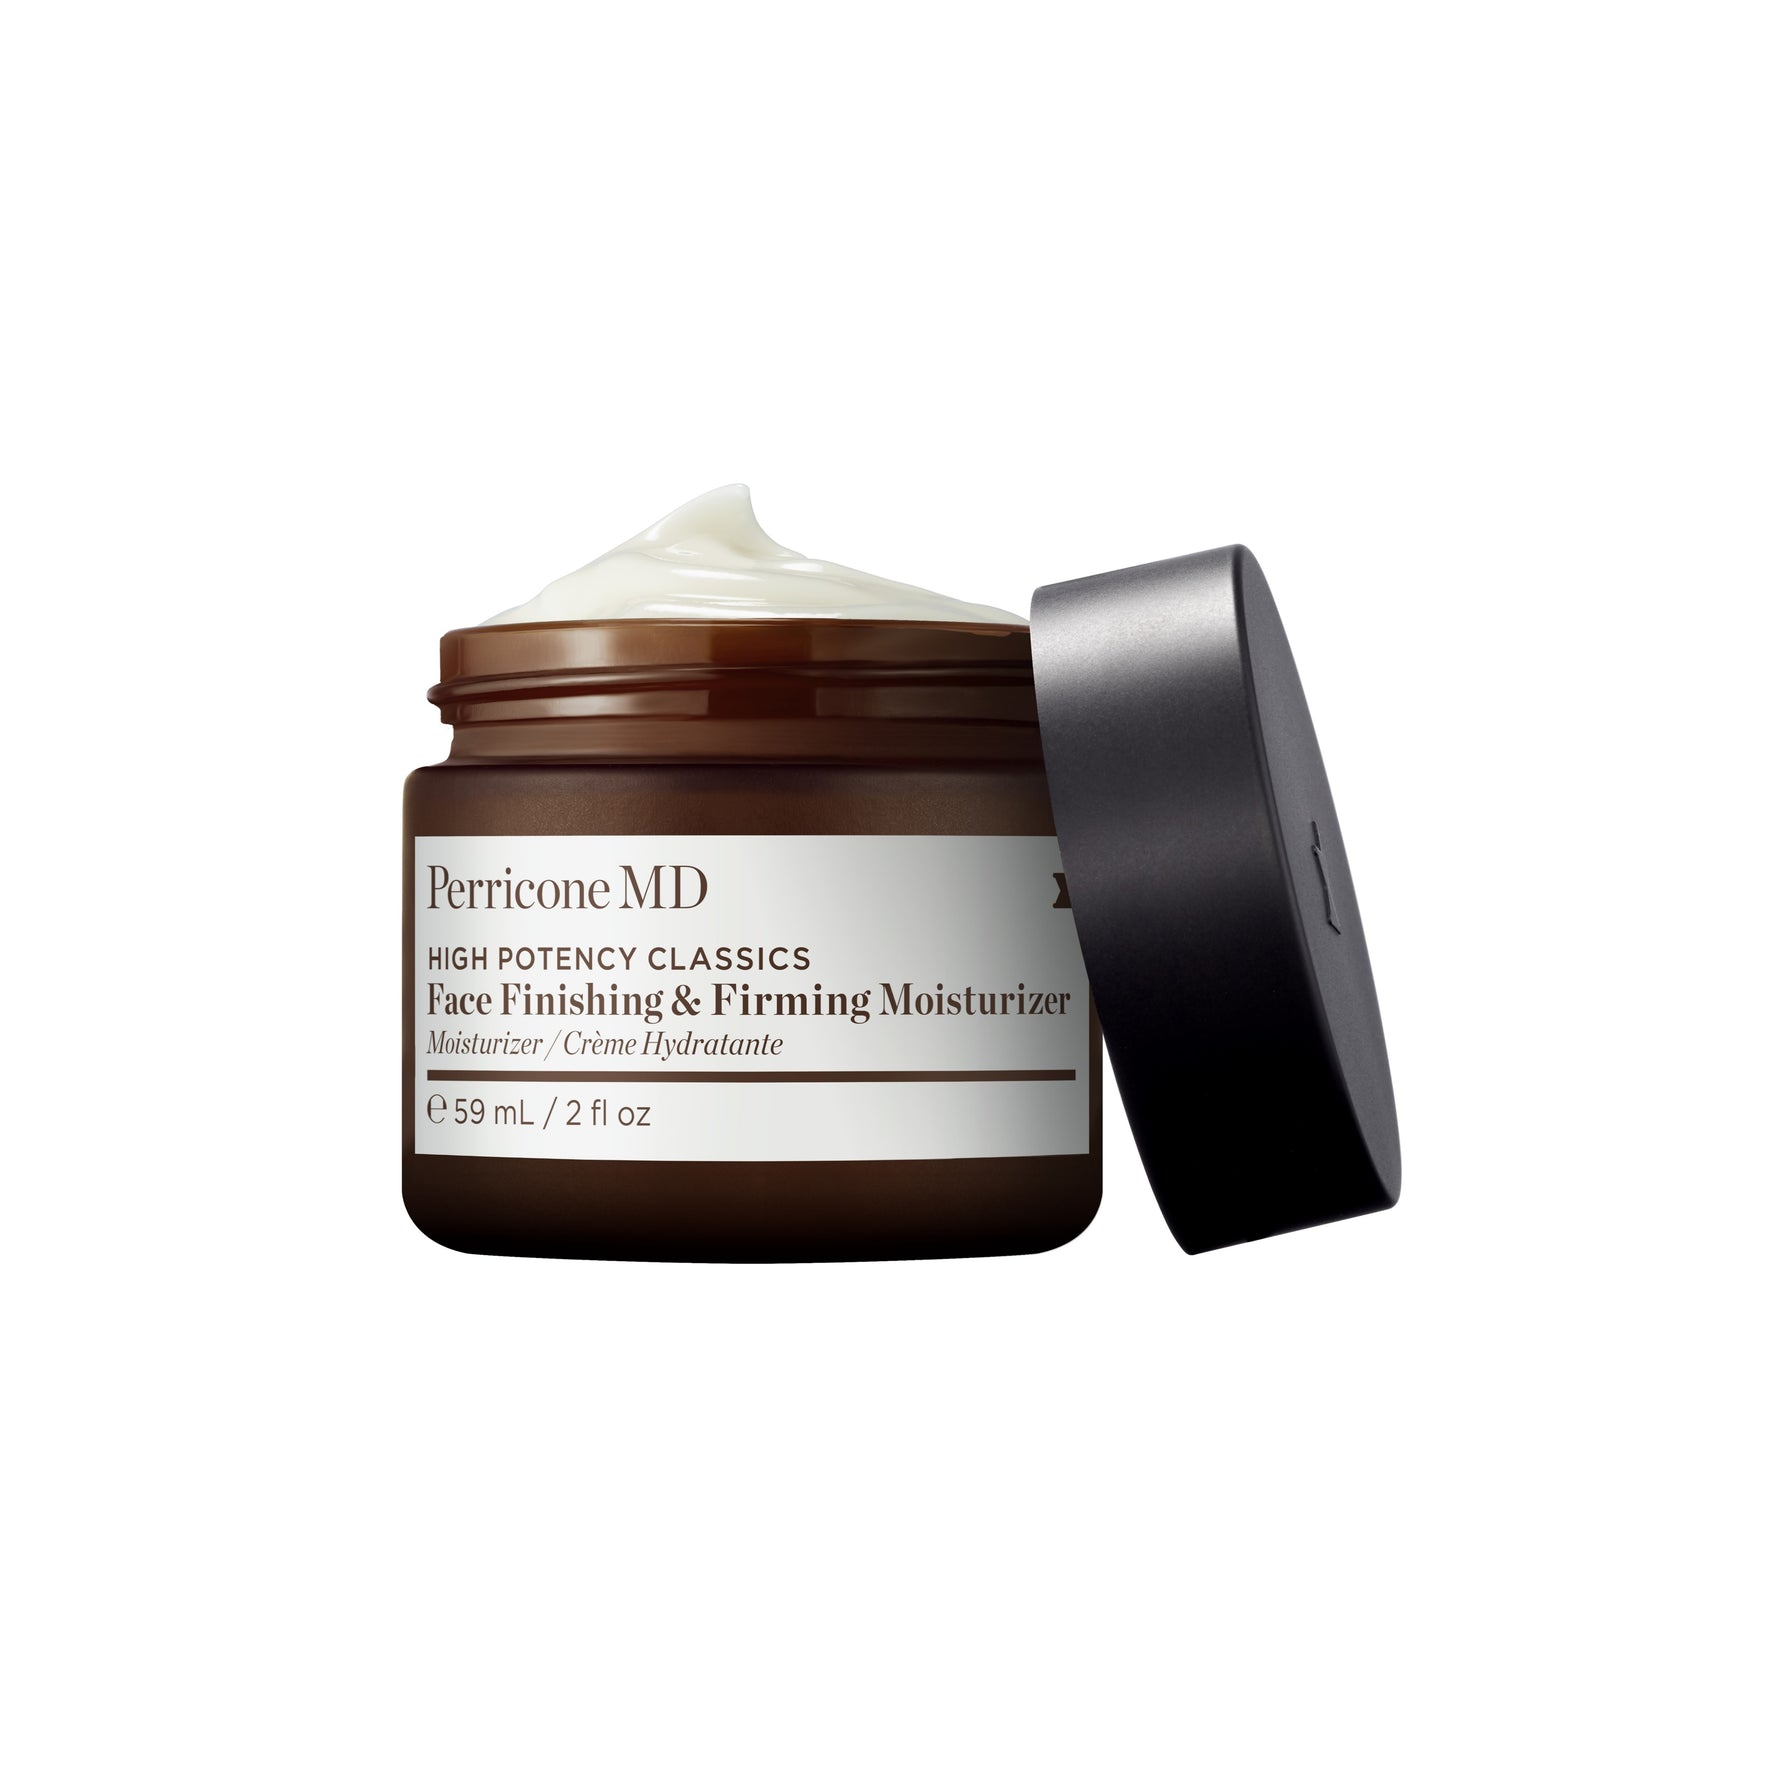 Perricone MD Face Finishing & Firming Moisturizer (59ml)